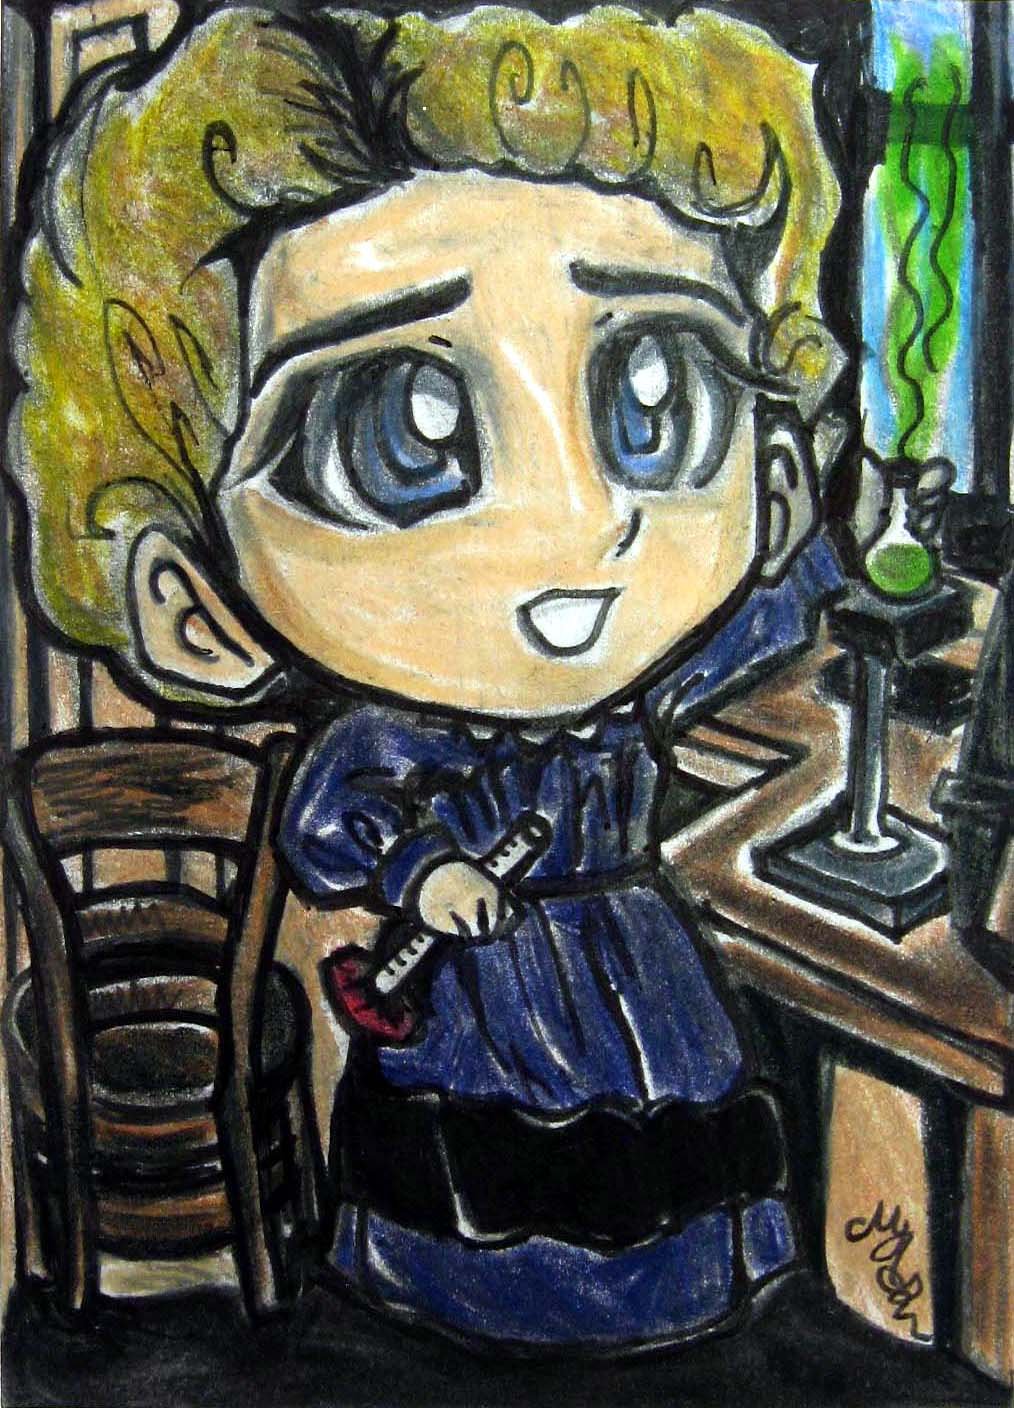 Scientist Marie Curie Japanese Anime Art Original Sketch Card Drawing ACEO PSC 1/1 by Maia